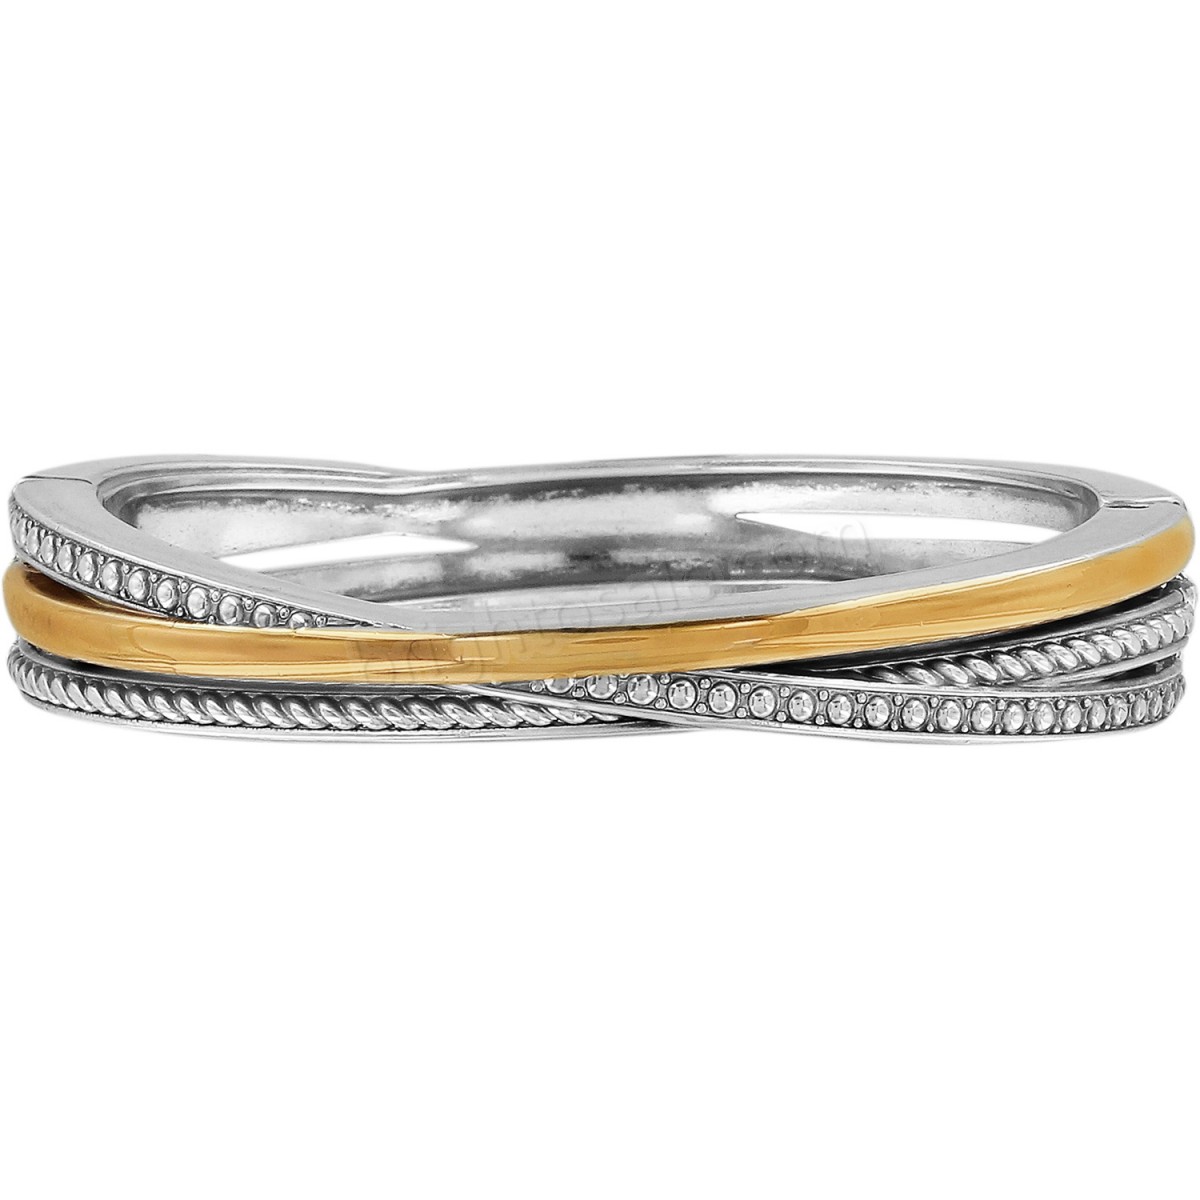 Brighton Collectibles & Online Discount Neptune's Rings Narrow Hinged Bangle - -1